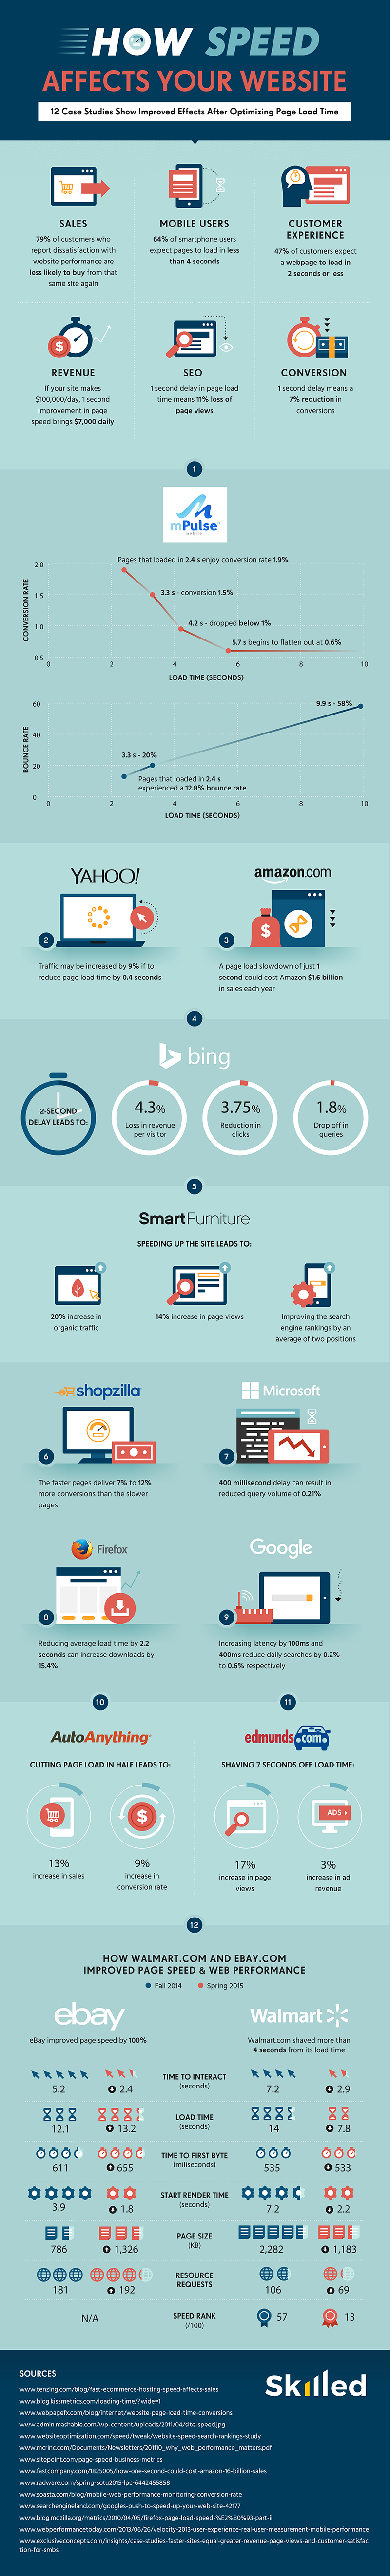 Infographic from skilled.co on website speed